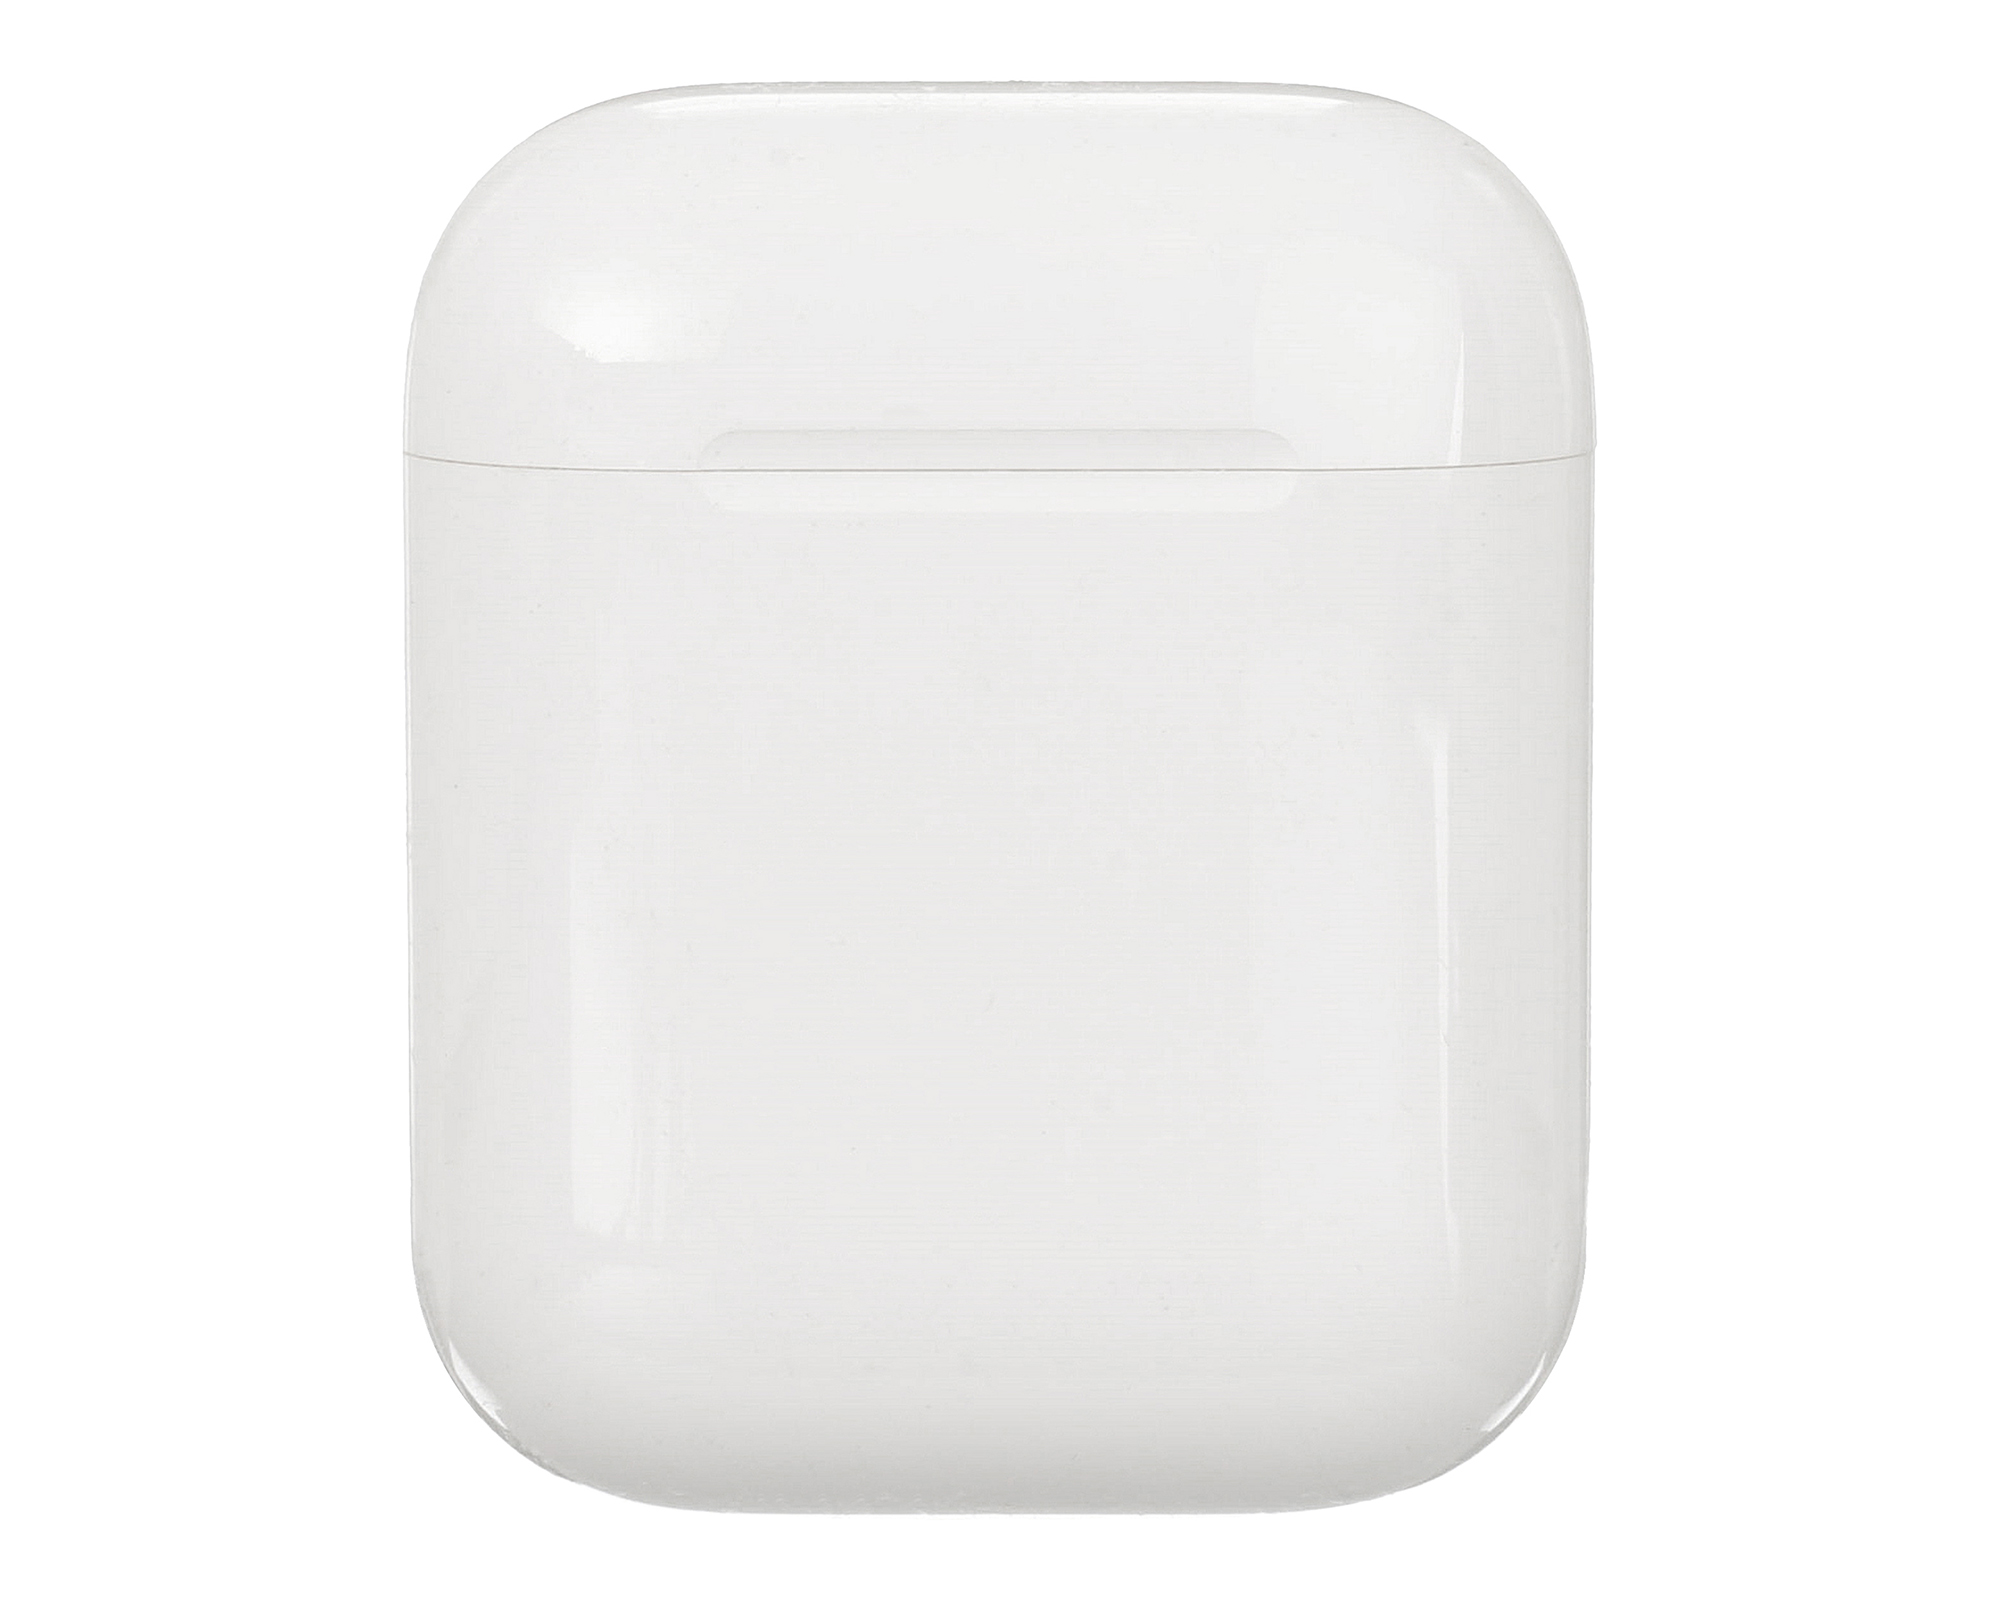 Used Apple AirPods Generation 2 with Wireless Charging Case MRXJ2AM/A (Used ) - image 5 of 8